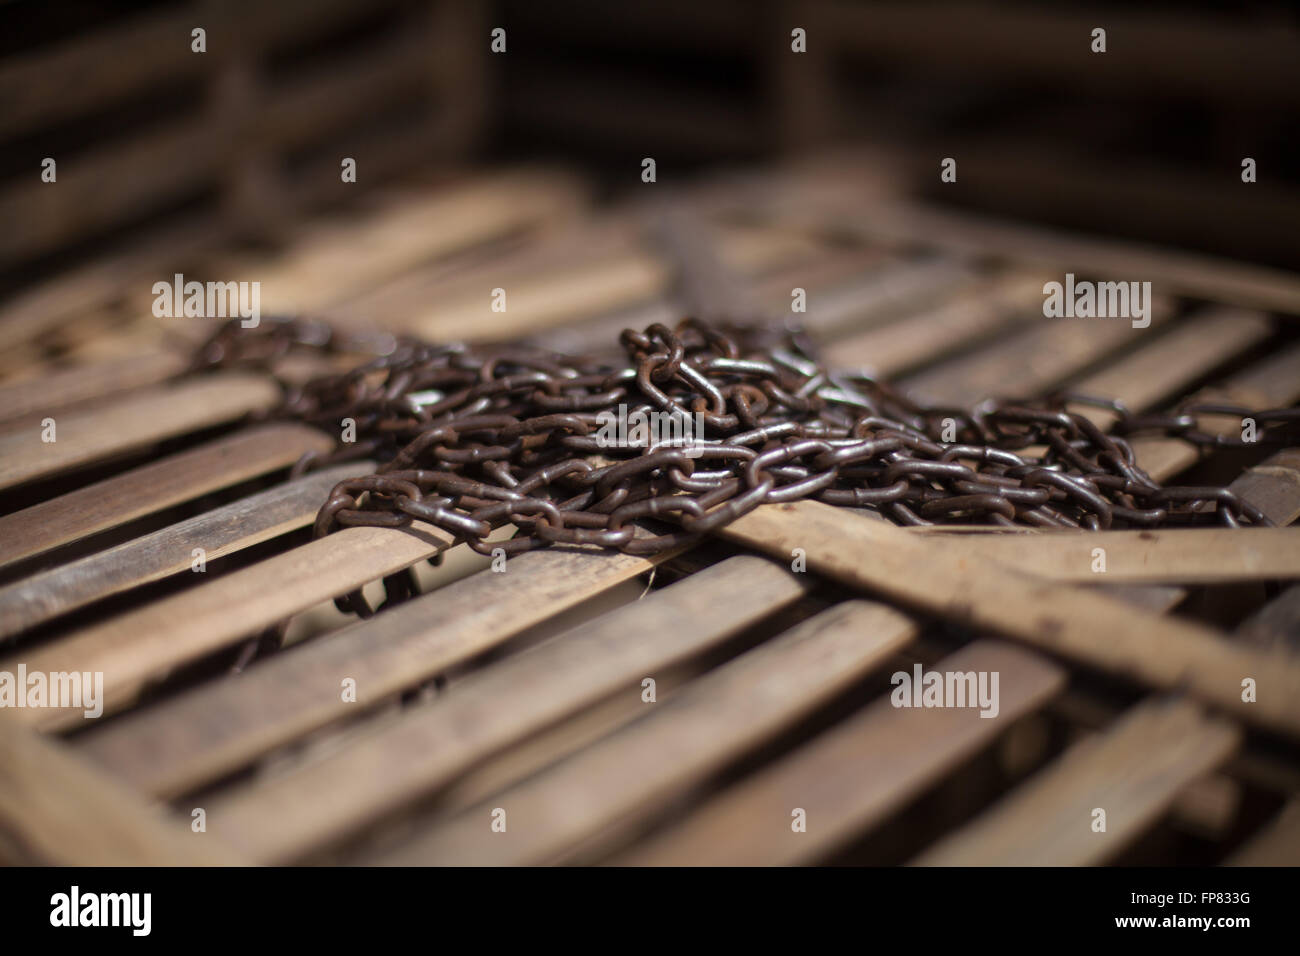 Close-Up Of Rusty Chain On Wooden Box Stock Photo